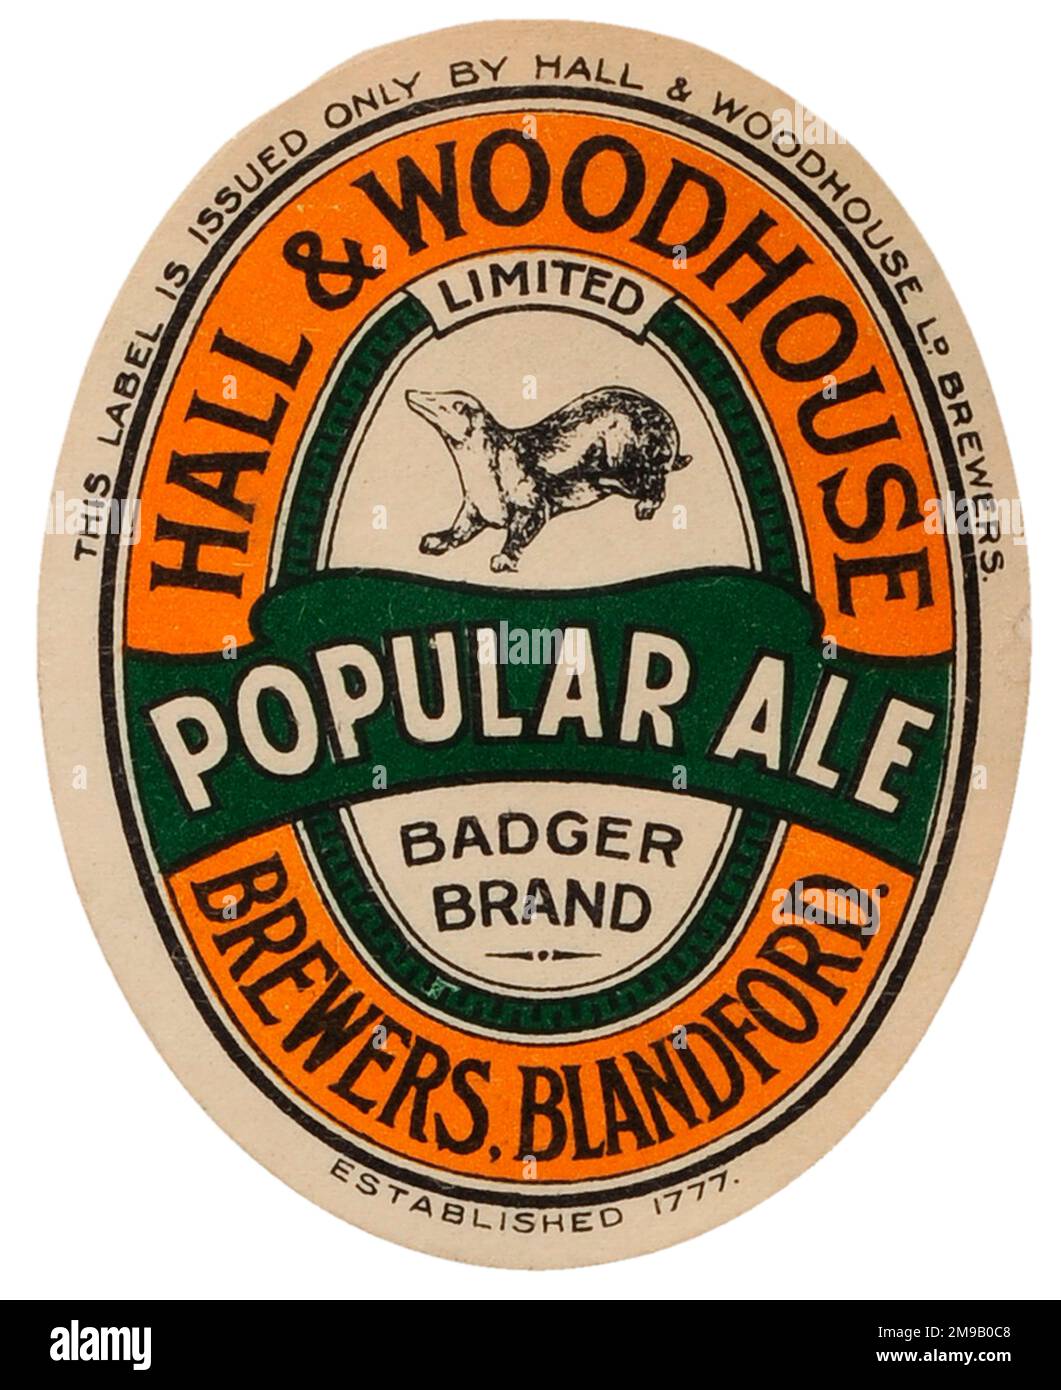 Hall & Woodhouse Popular Ale Stock Photo